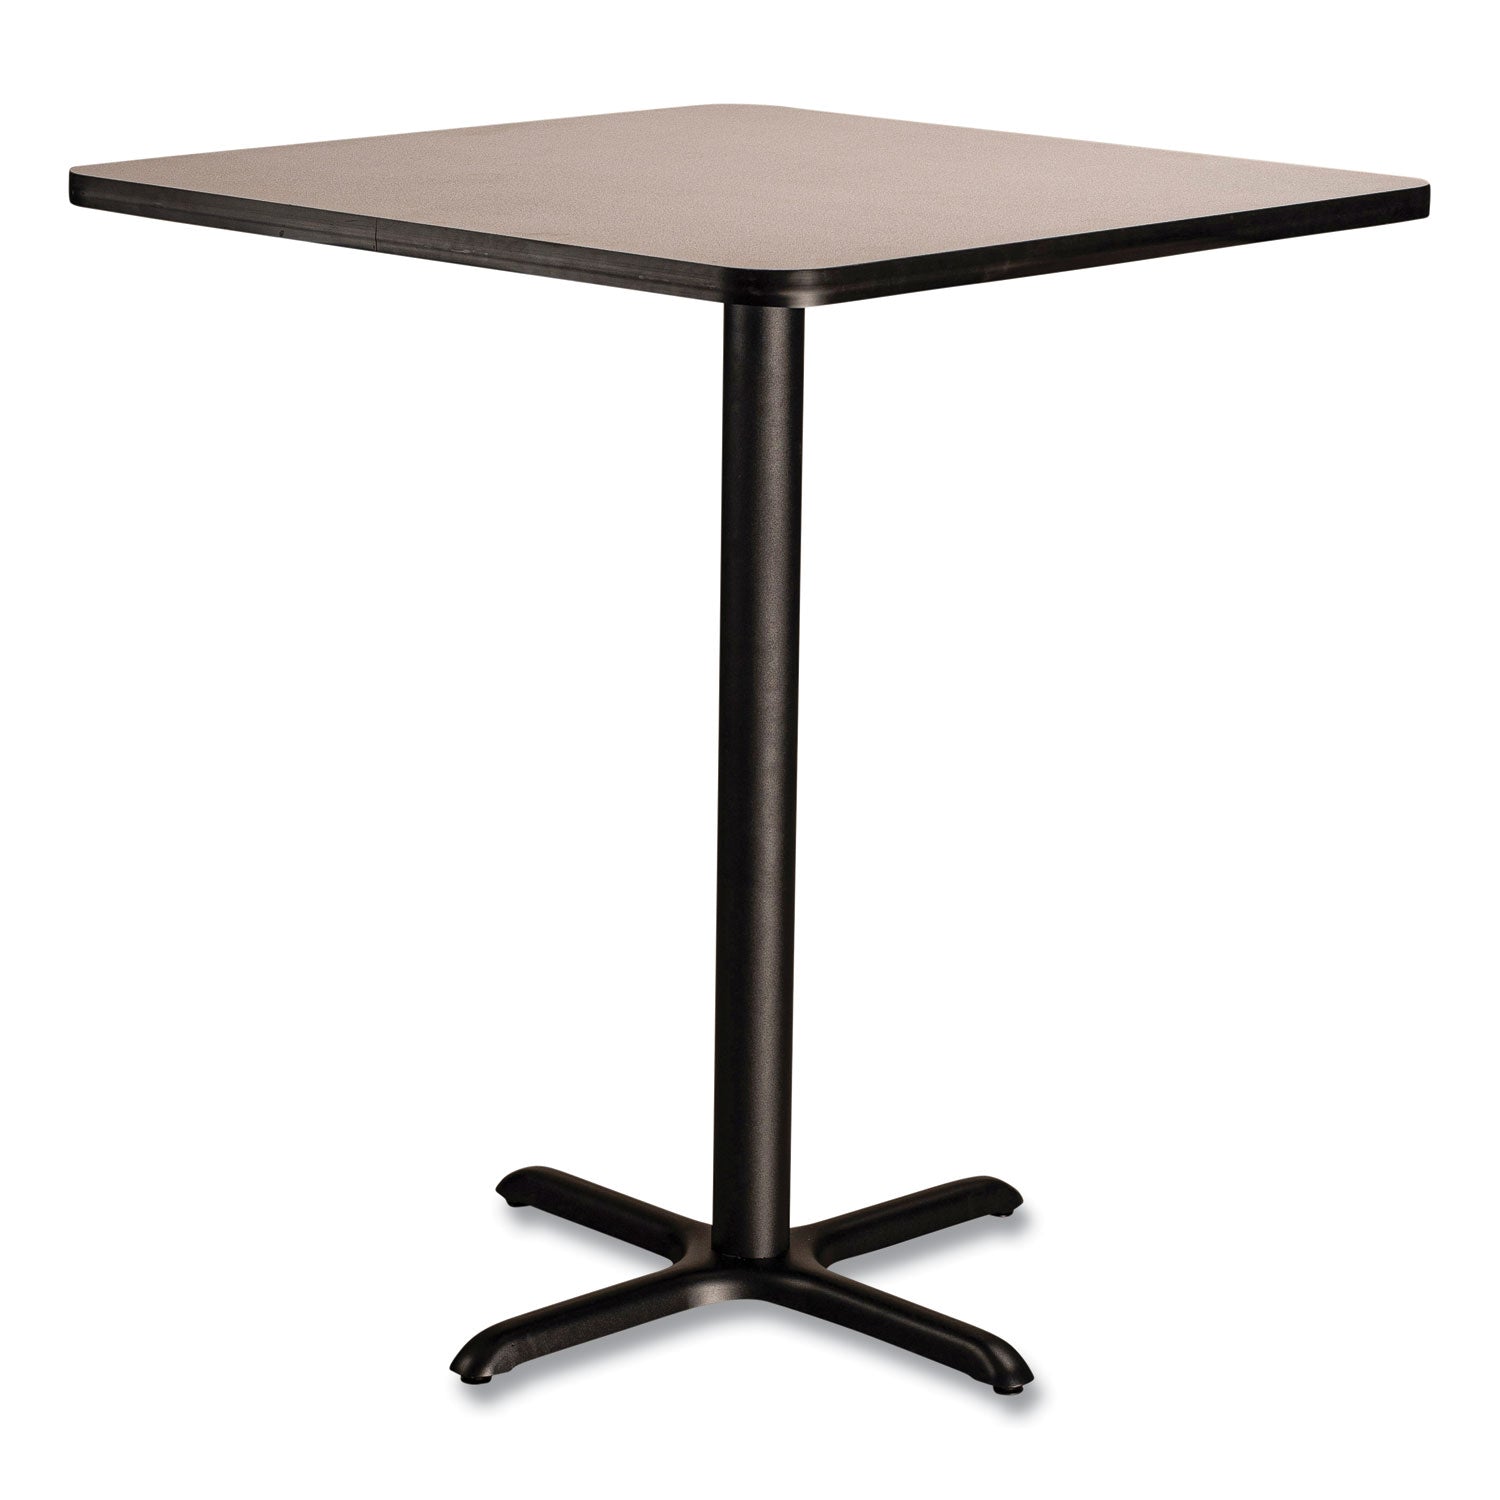 cafe-table-36w-x-36d-x-42h-square-top-x-base-gray-nebula-top-black-base-ships-in-7-10-business-days_npsct33636xb1gy - 3